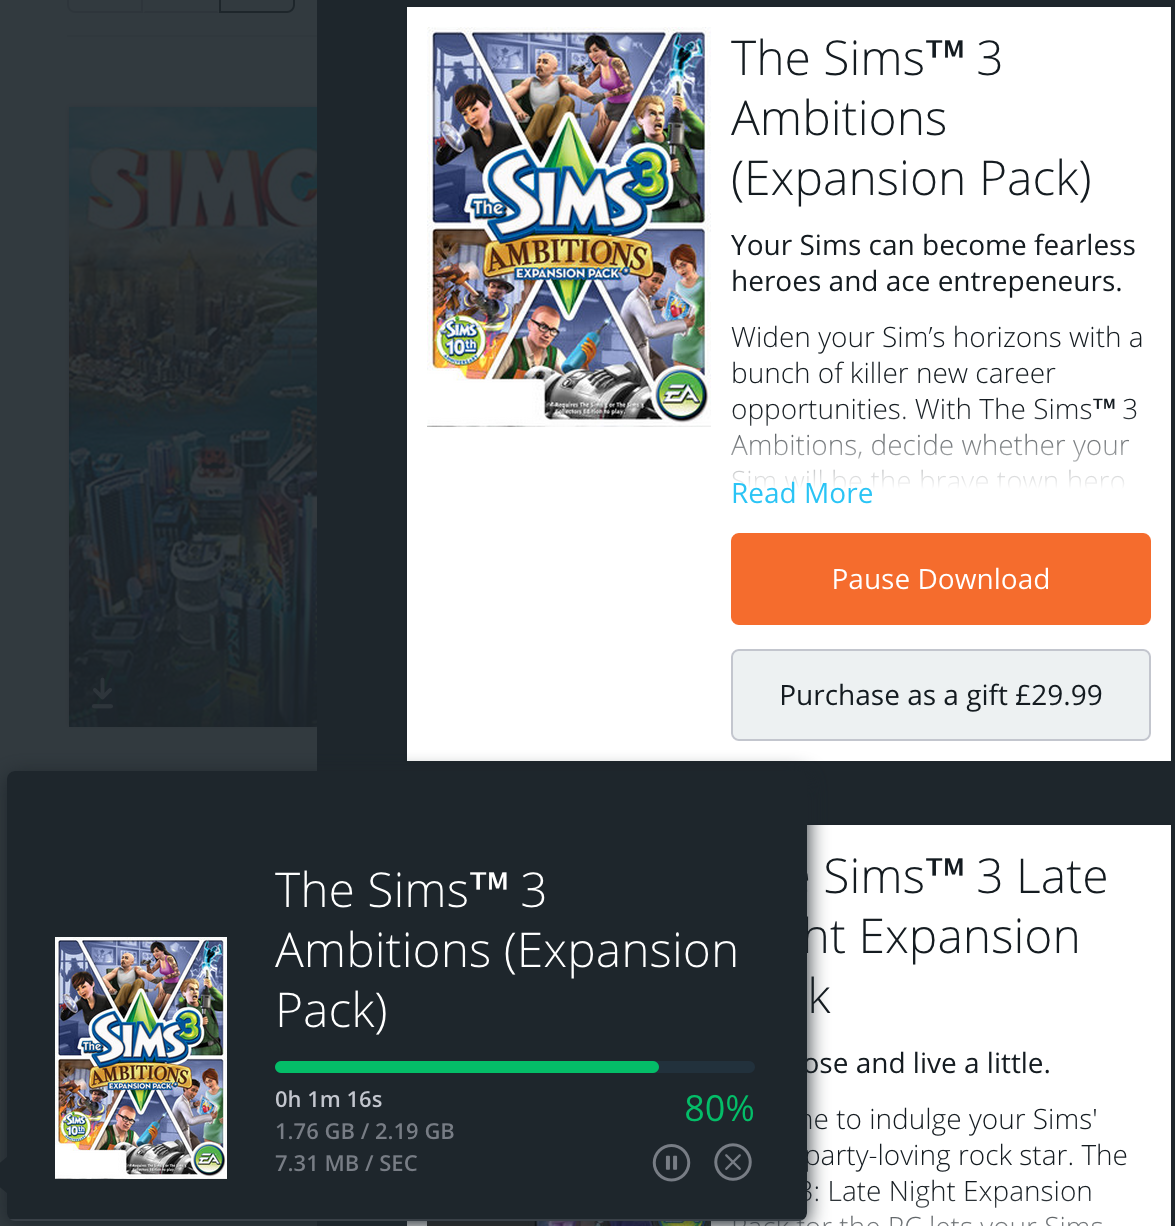 can you access sims 4 for mac on origin basic